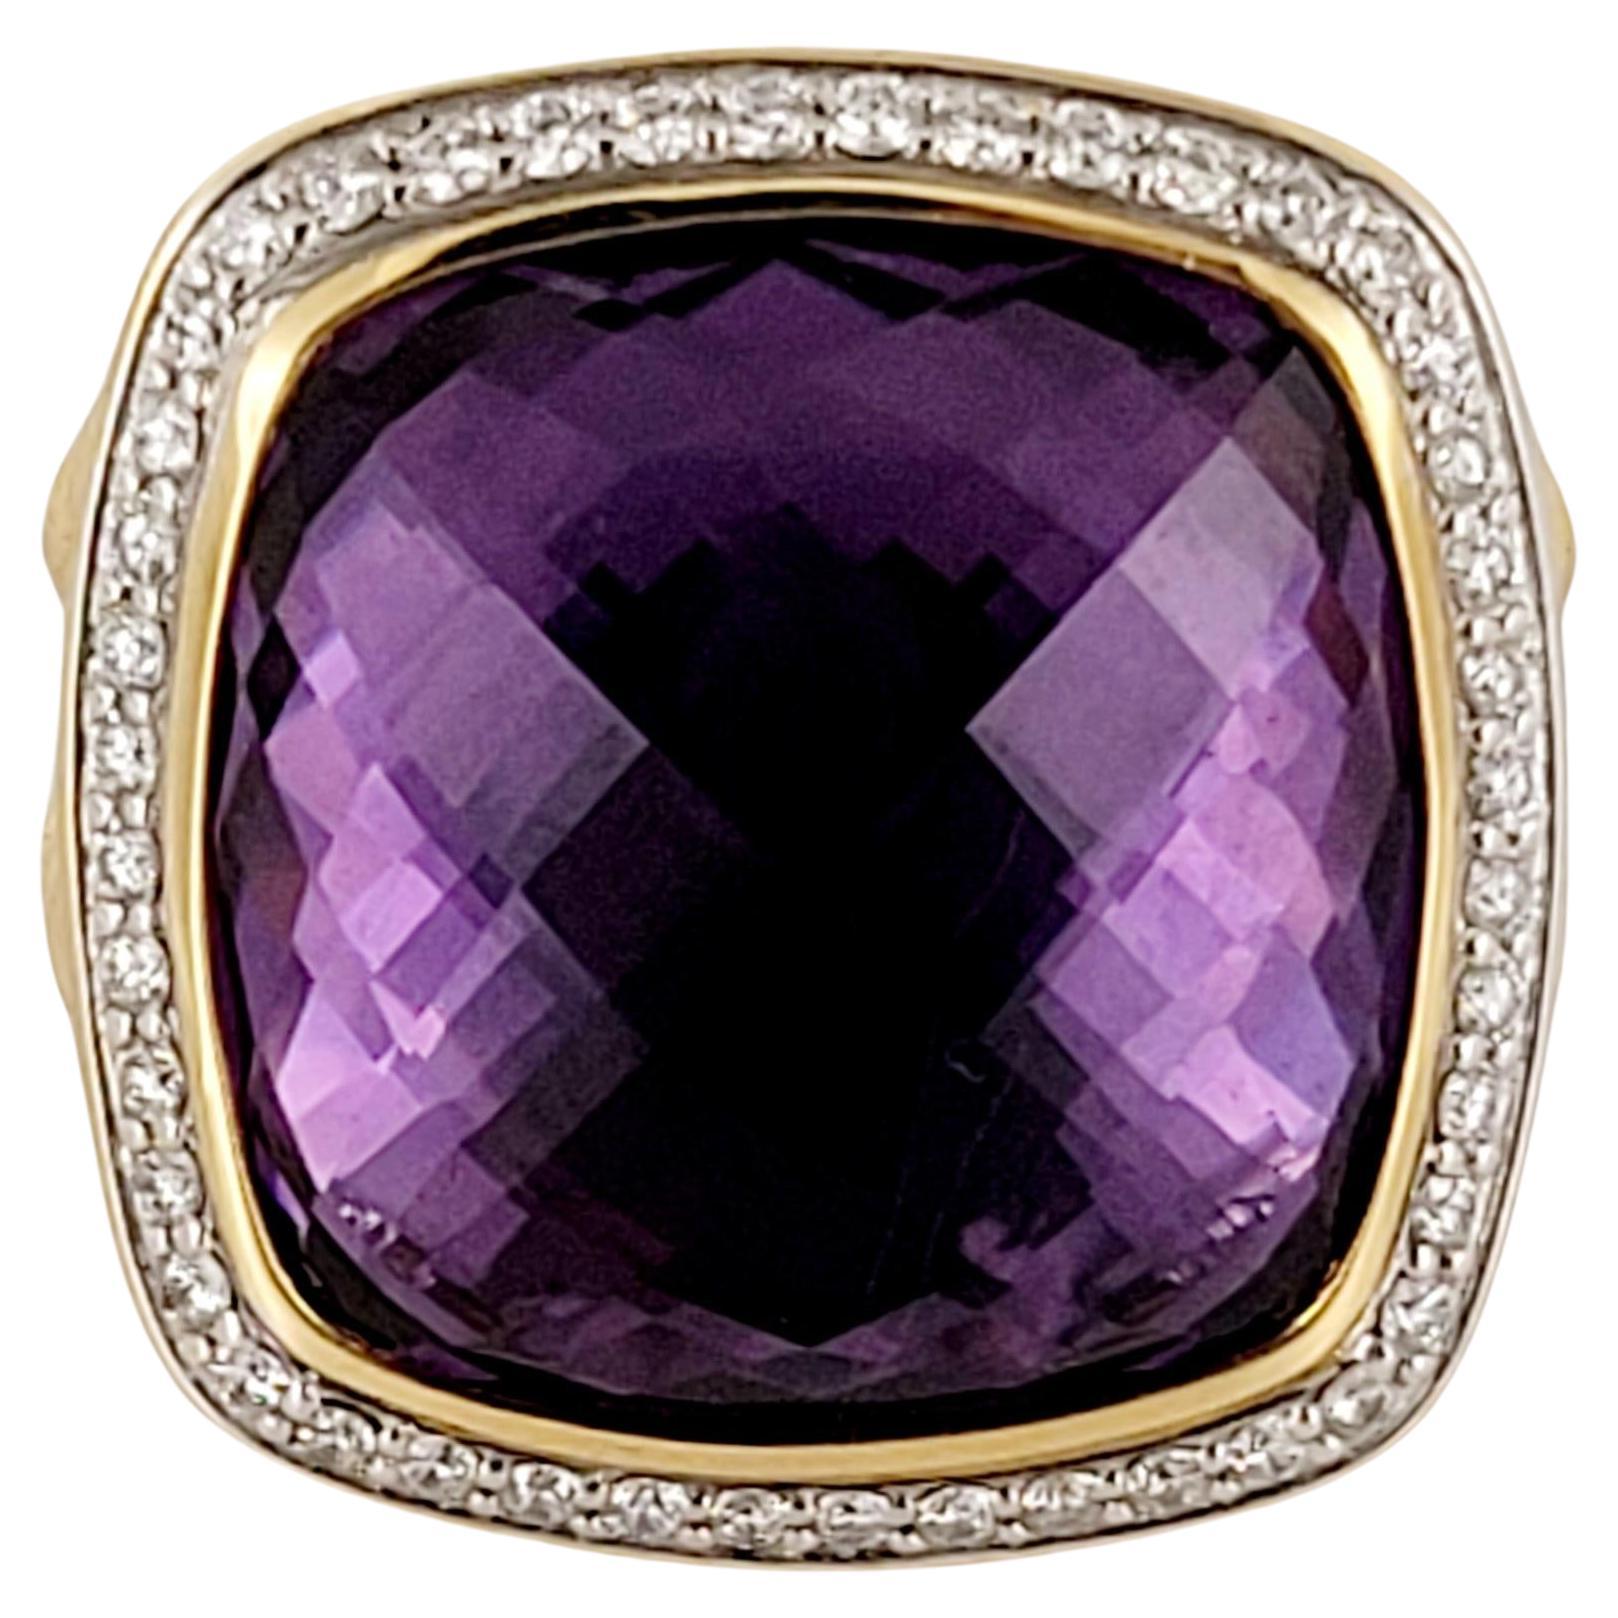 David Yurman Albion Ring with Amethyst and Diamonds in 18k Gold